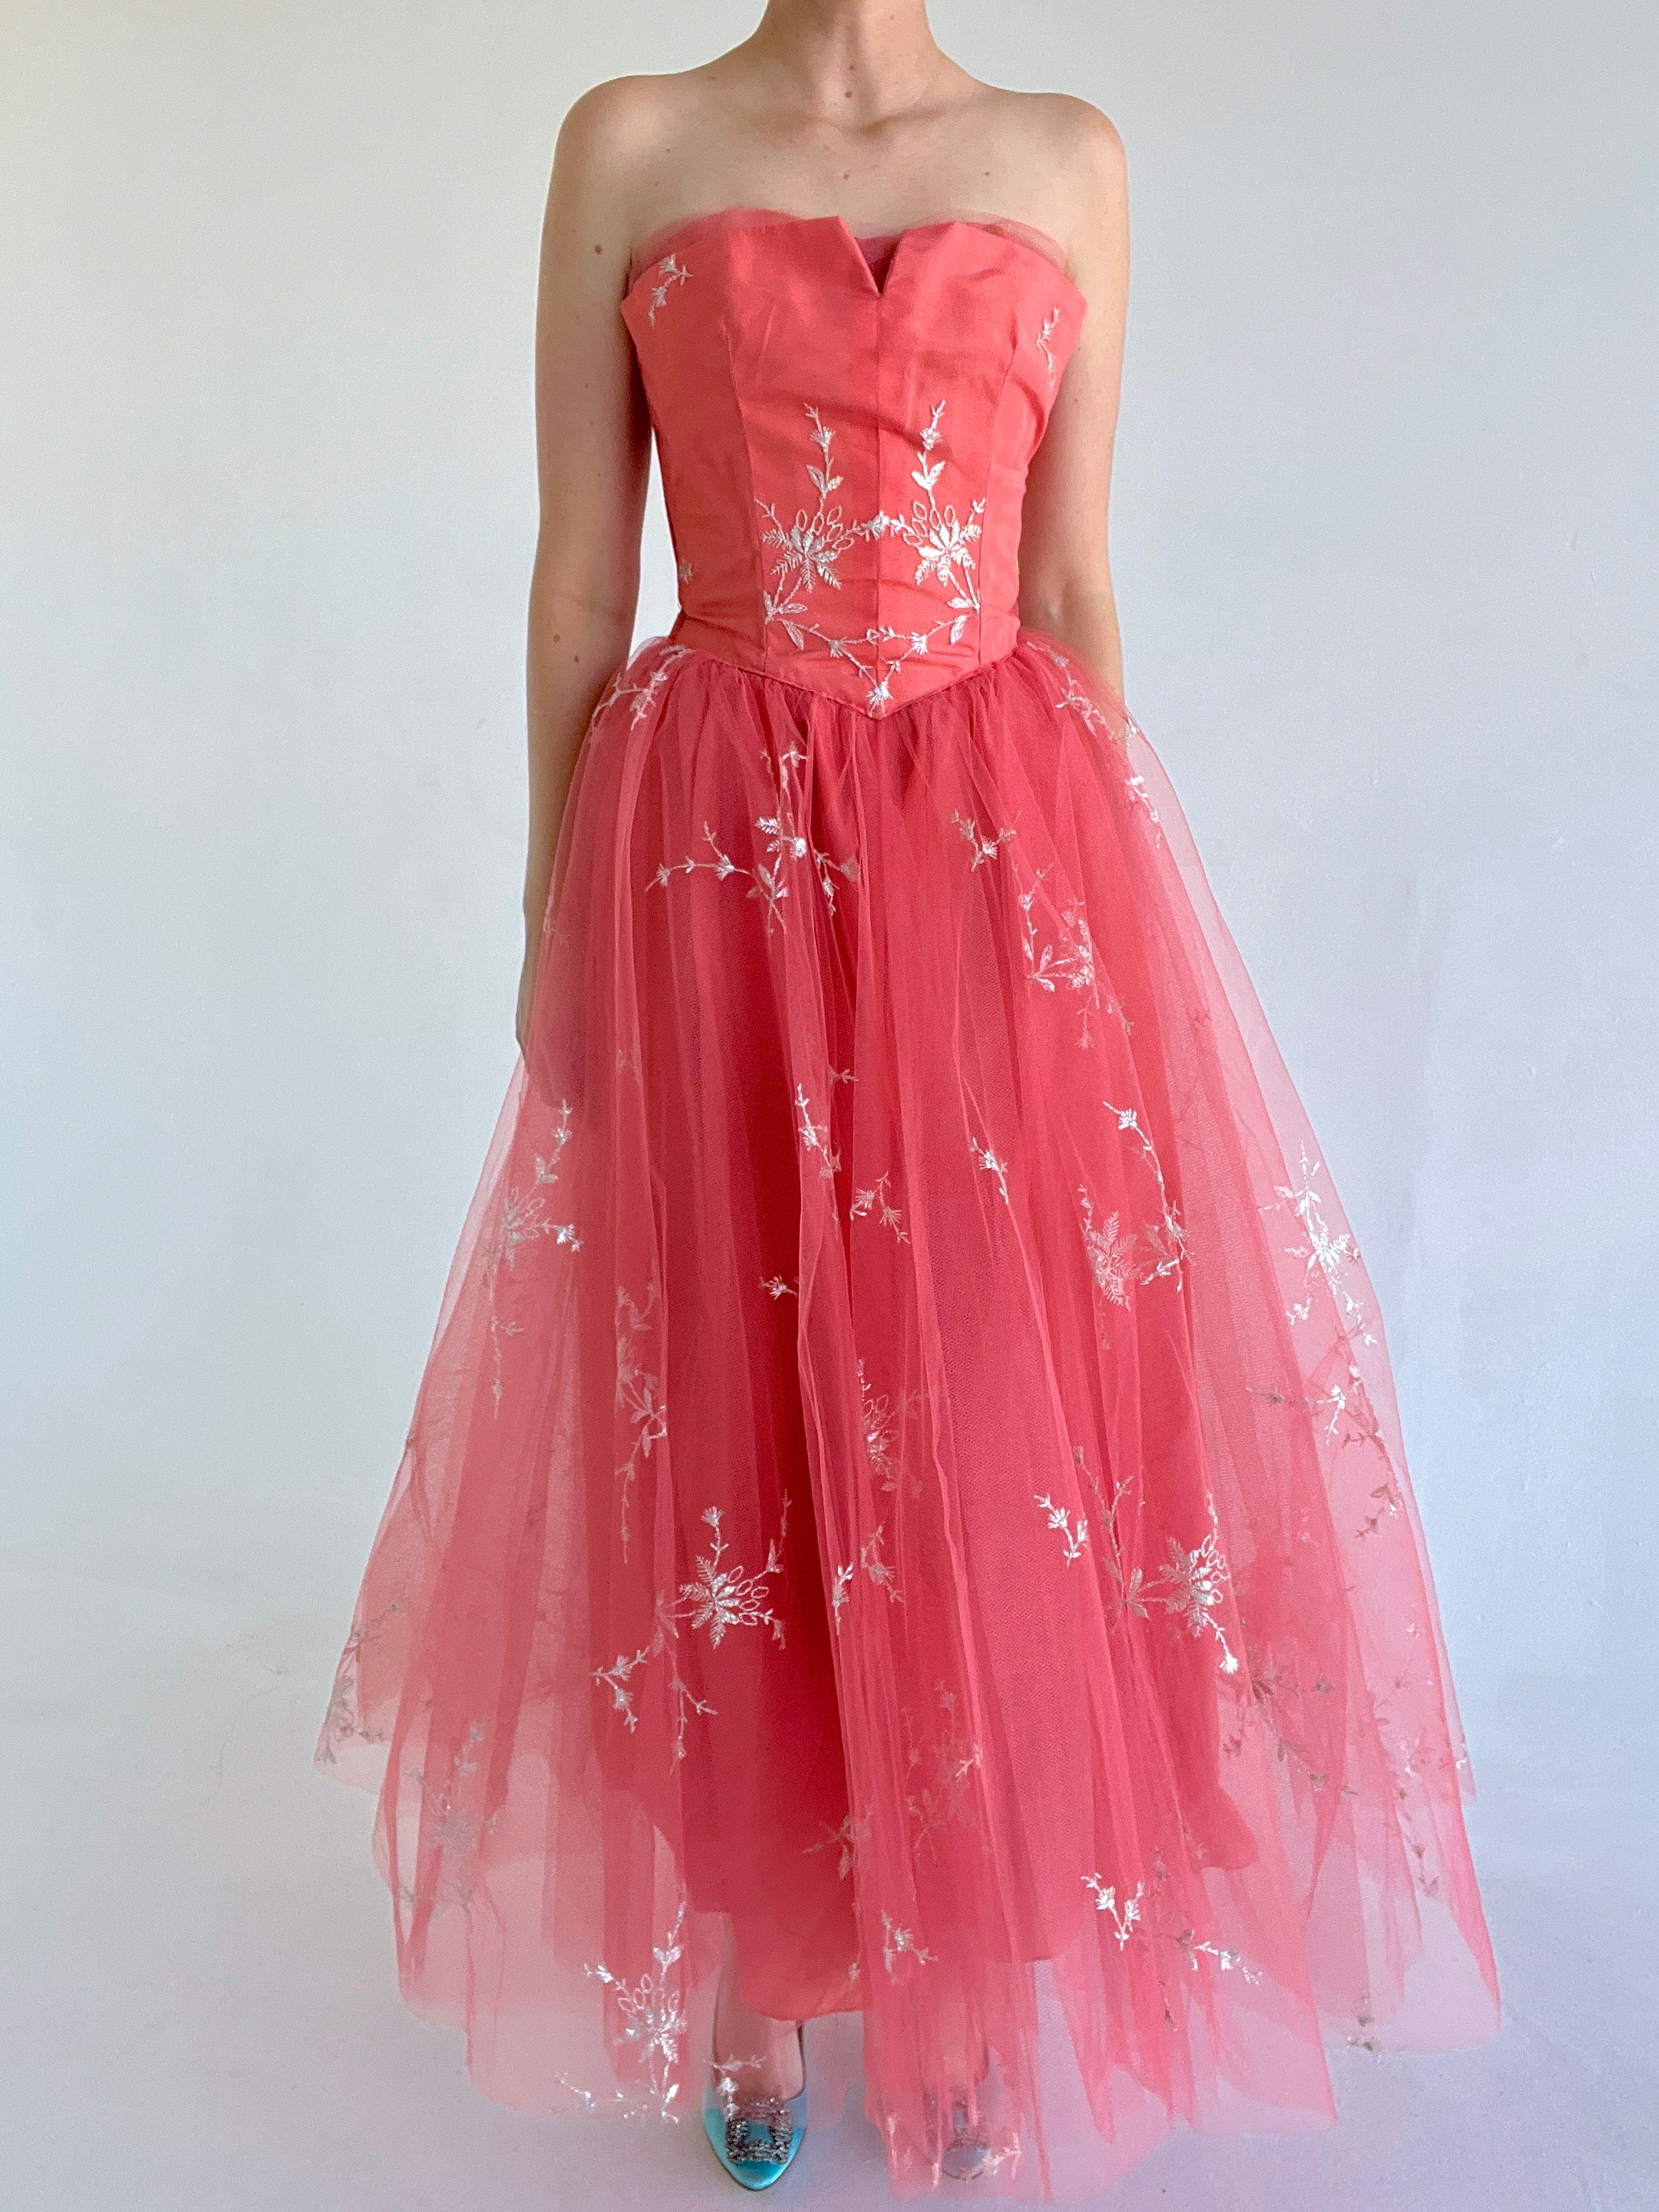 1950's Pink Tulle Strapless Party Dress with Silver Embroidery